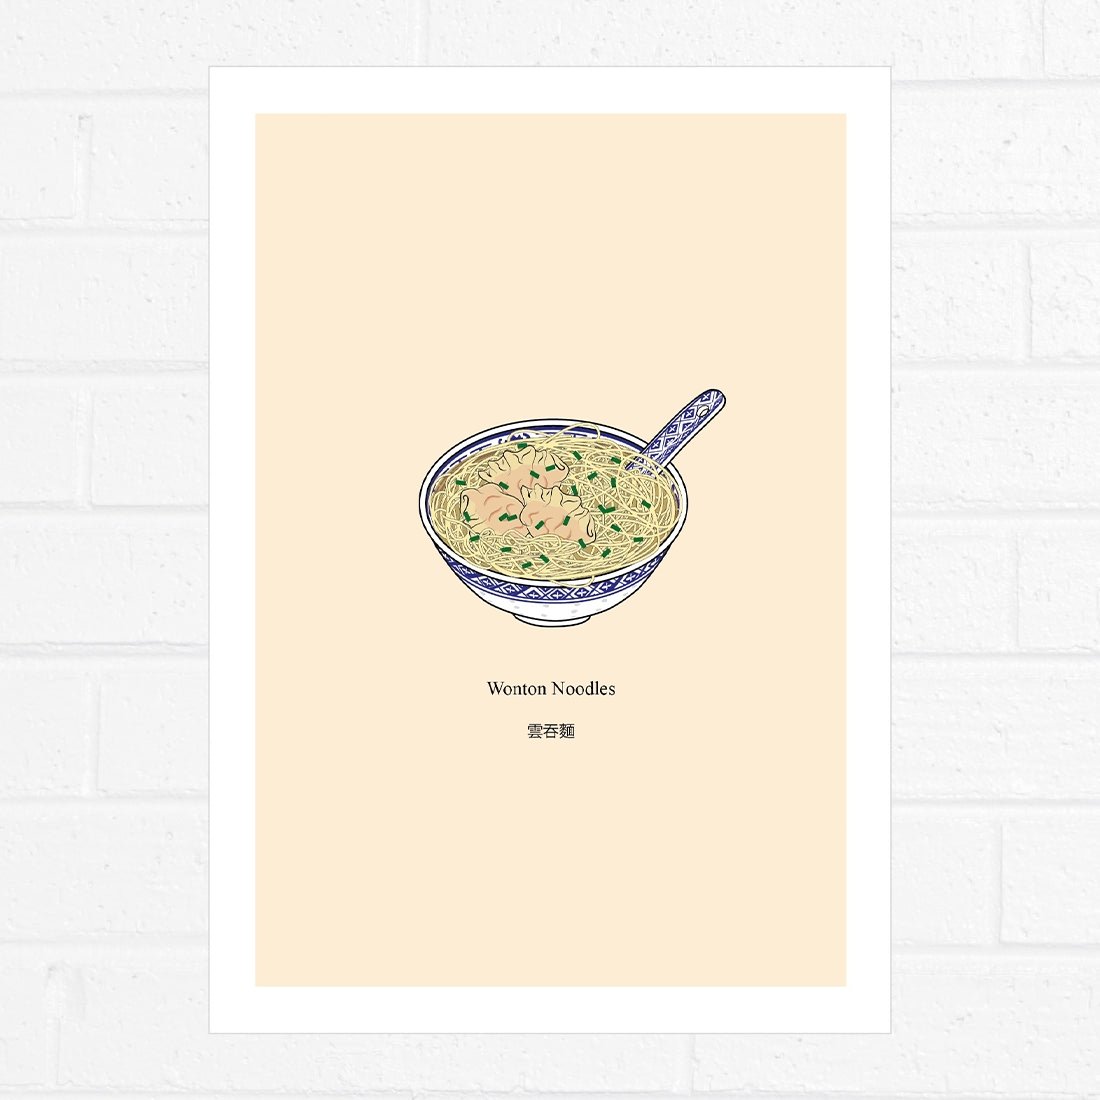 Wonton Noodles Illustration by Graphik' Re!collection - BetterThanFlowers